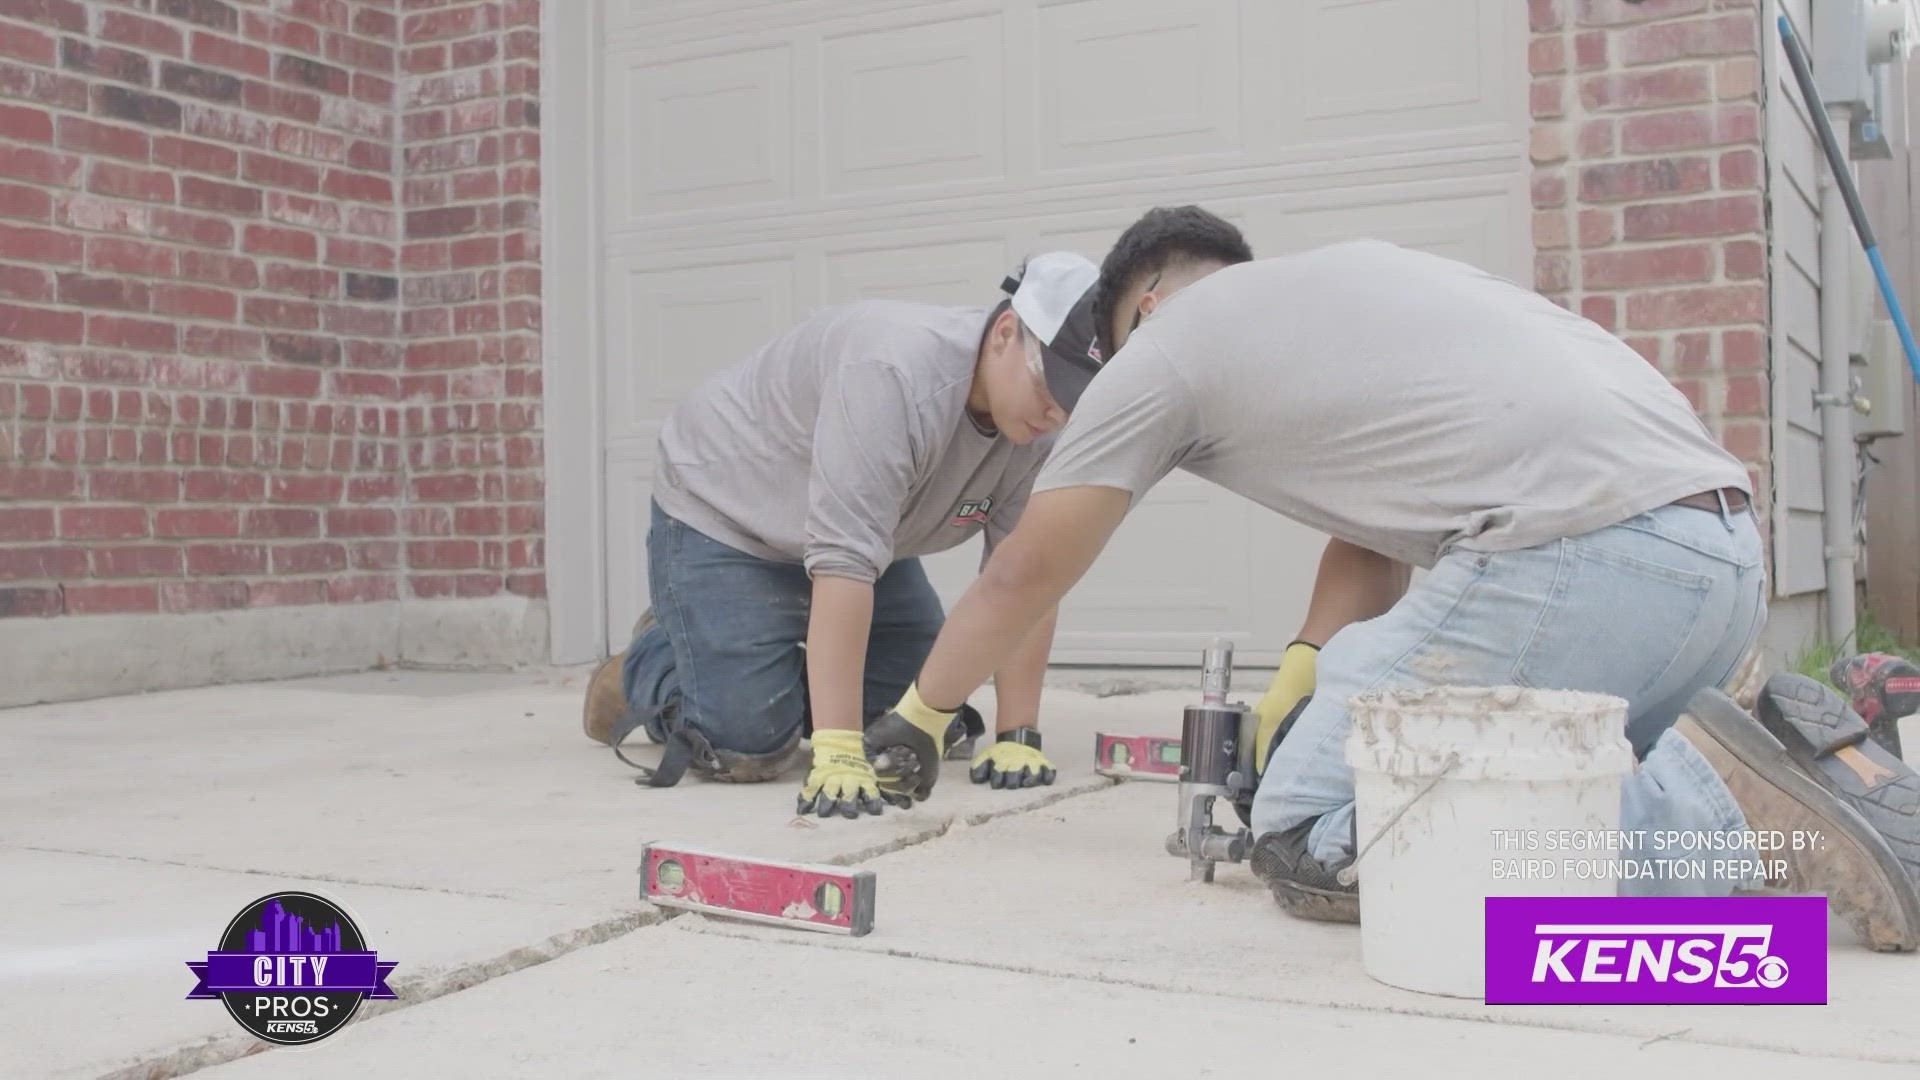 Services to help protect your home foundation. [Sponsored by: Baird Foundation Repair]